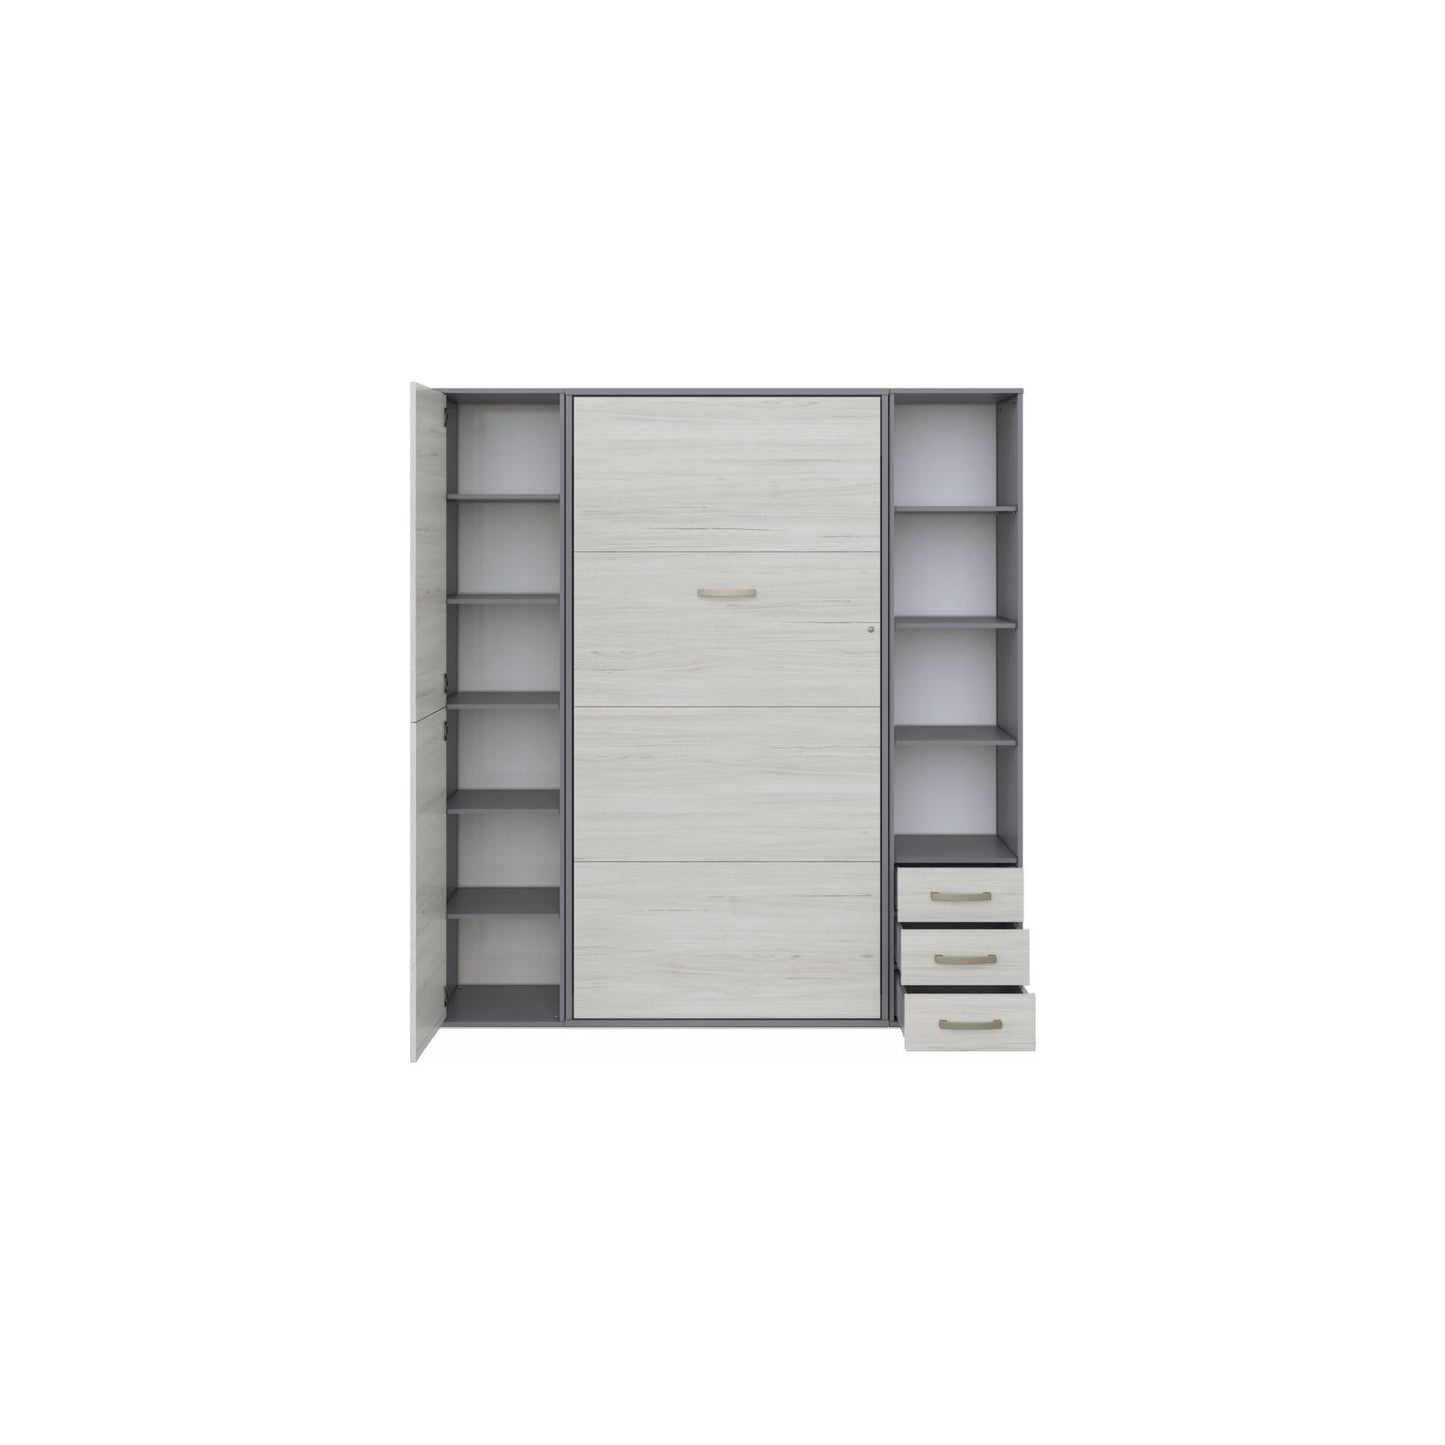 Maxima House Maxima House Invento Vertical Wall Bed, European Full XL Size with 2 cabinets